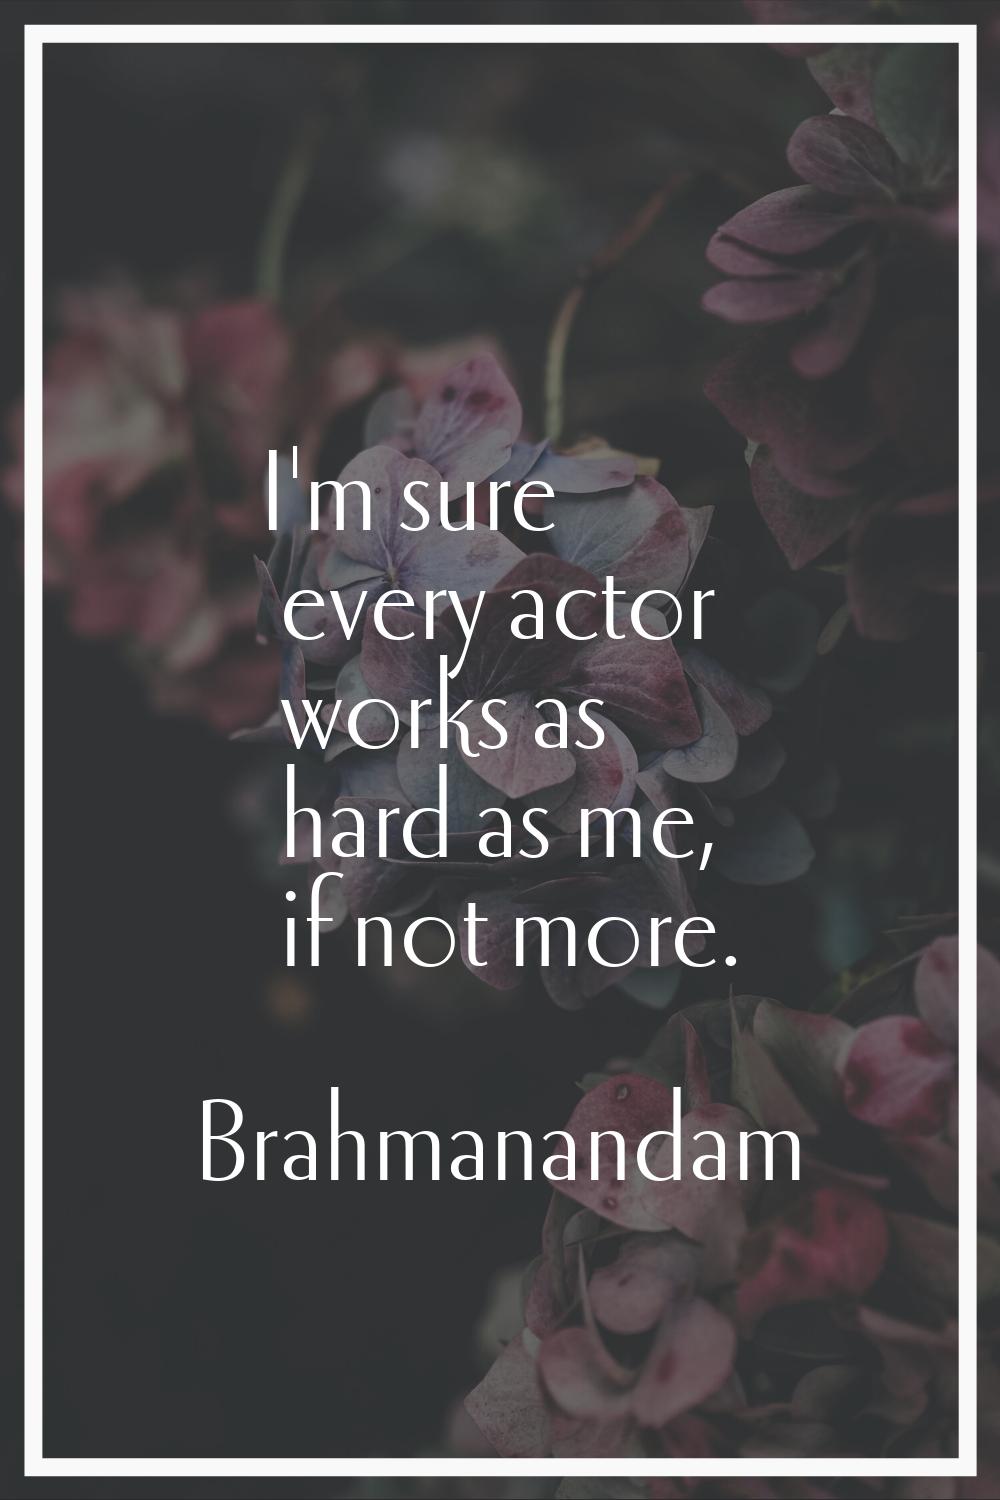 I'm sure every actor works as hard as me, if not more.